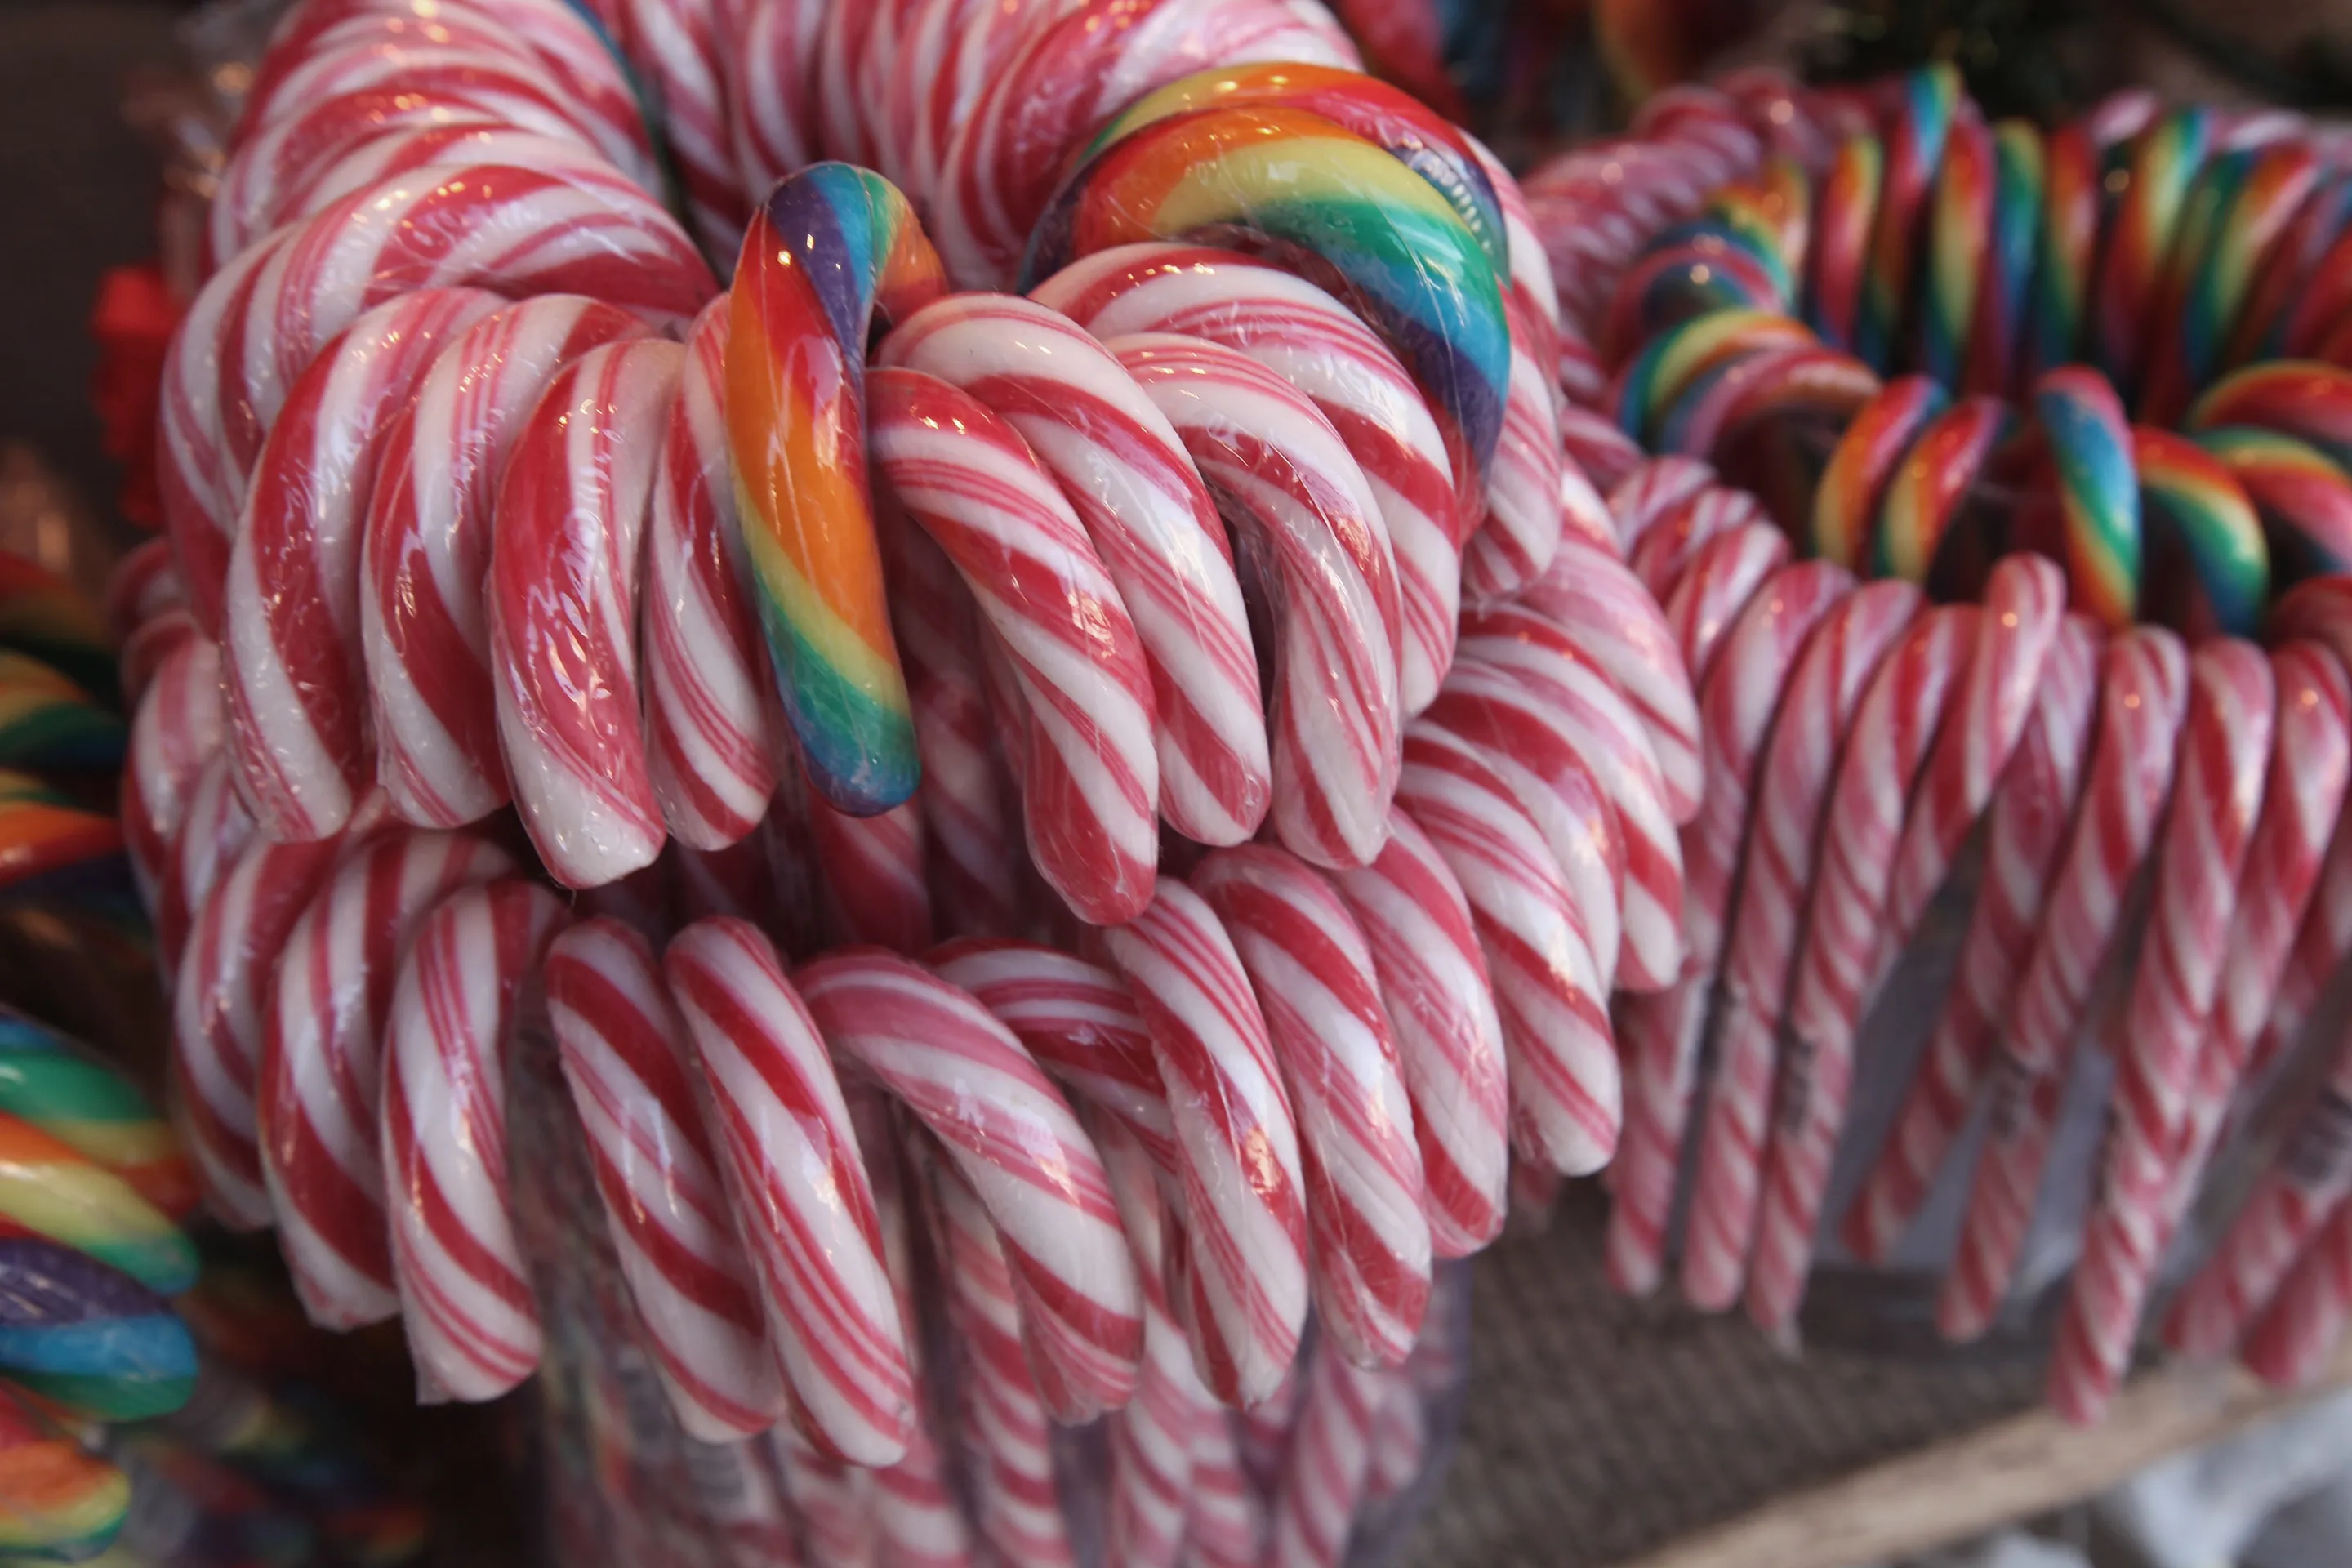 The Grinch Strikes Again: Now There's a Shortage of Candy Canes